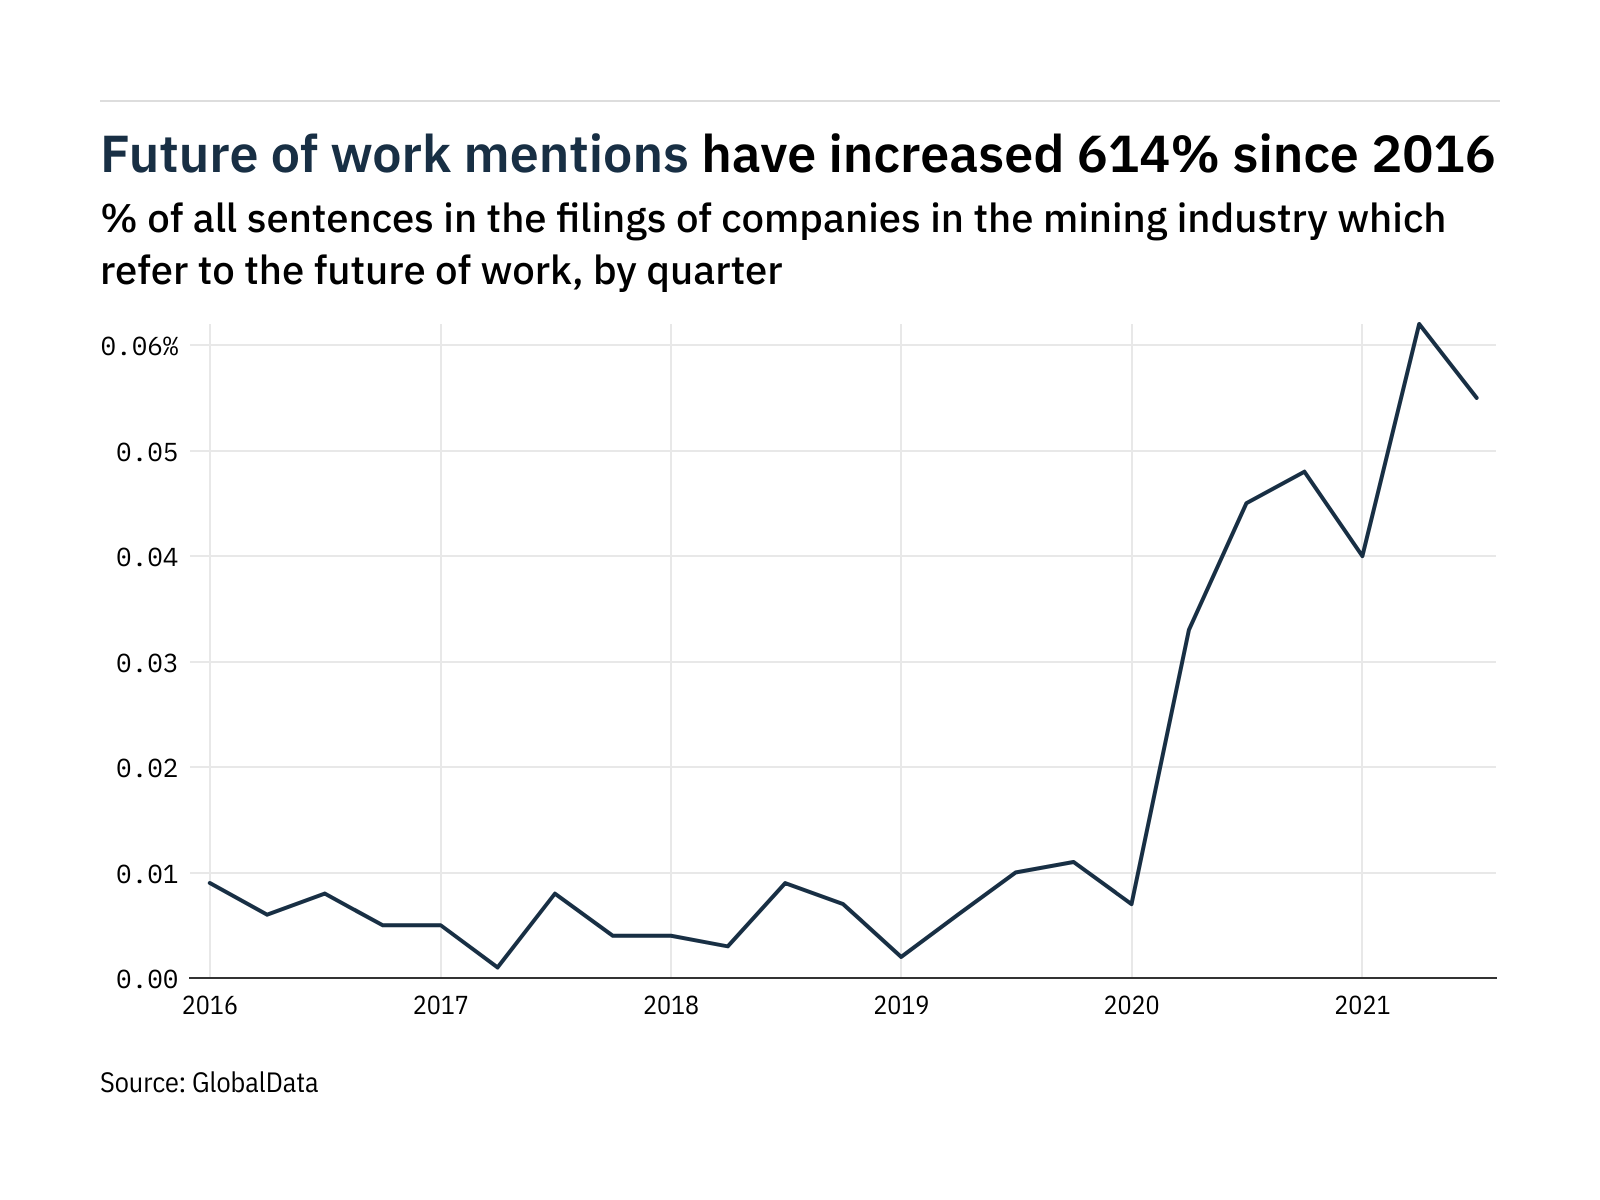 Filings buzz in the mining industry: 11% decrease in the future of work mentions in Q3 of 2021